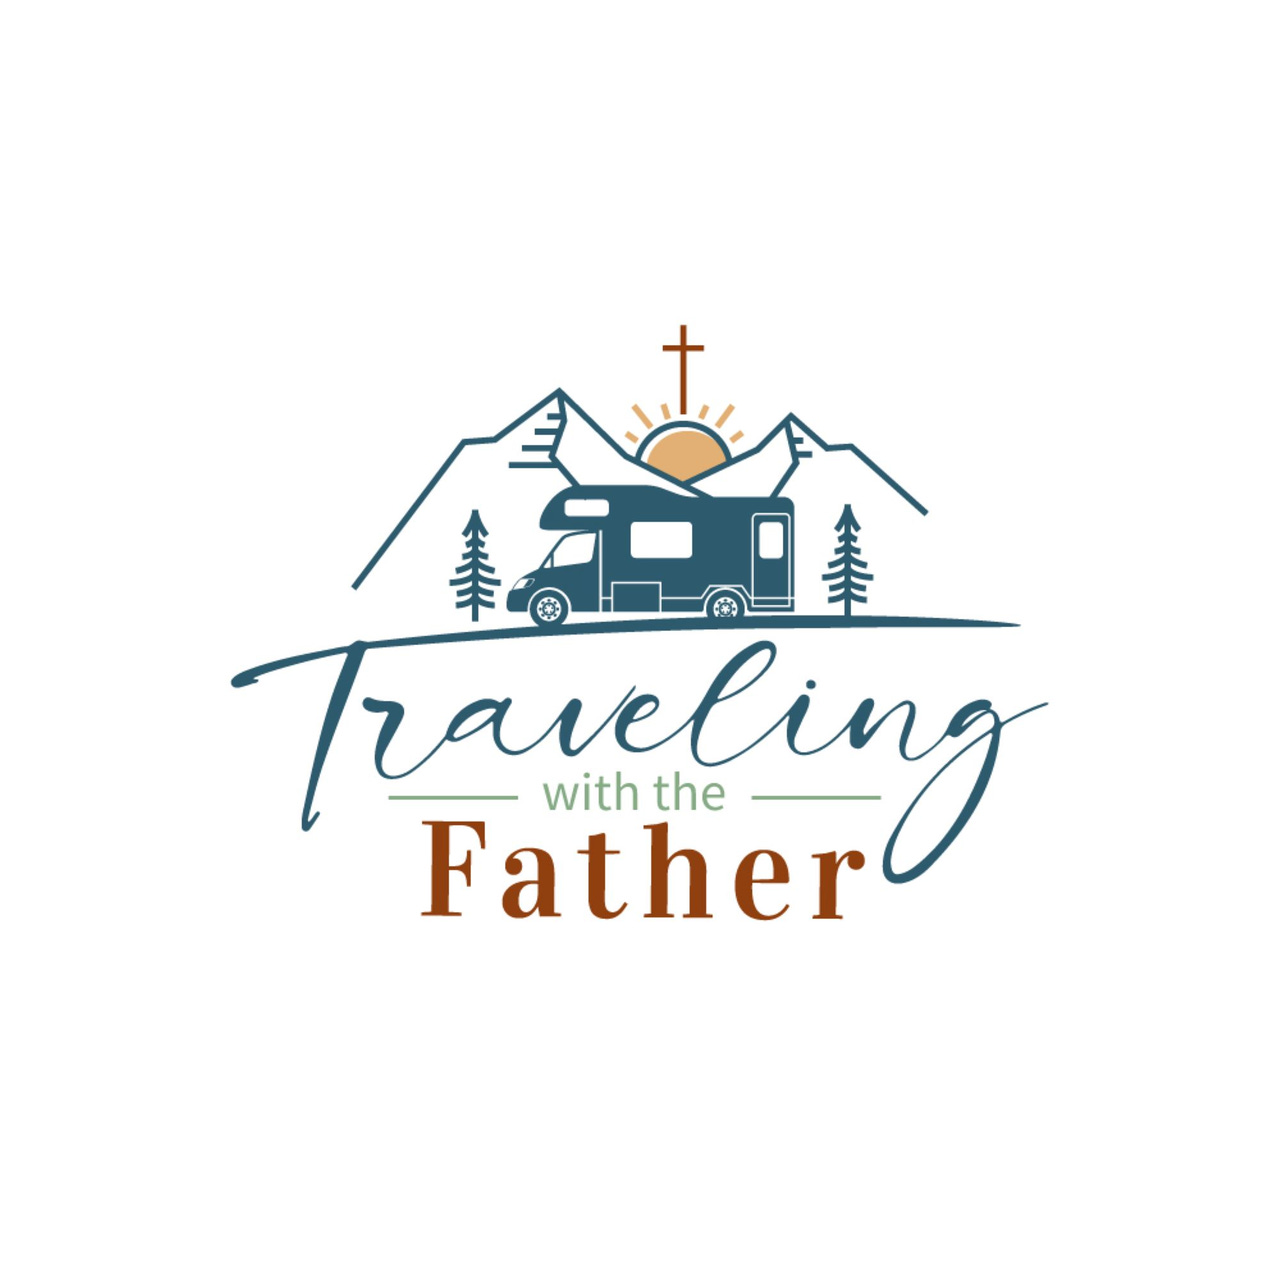 Traveling with the Father